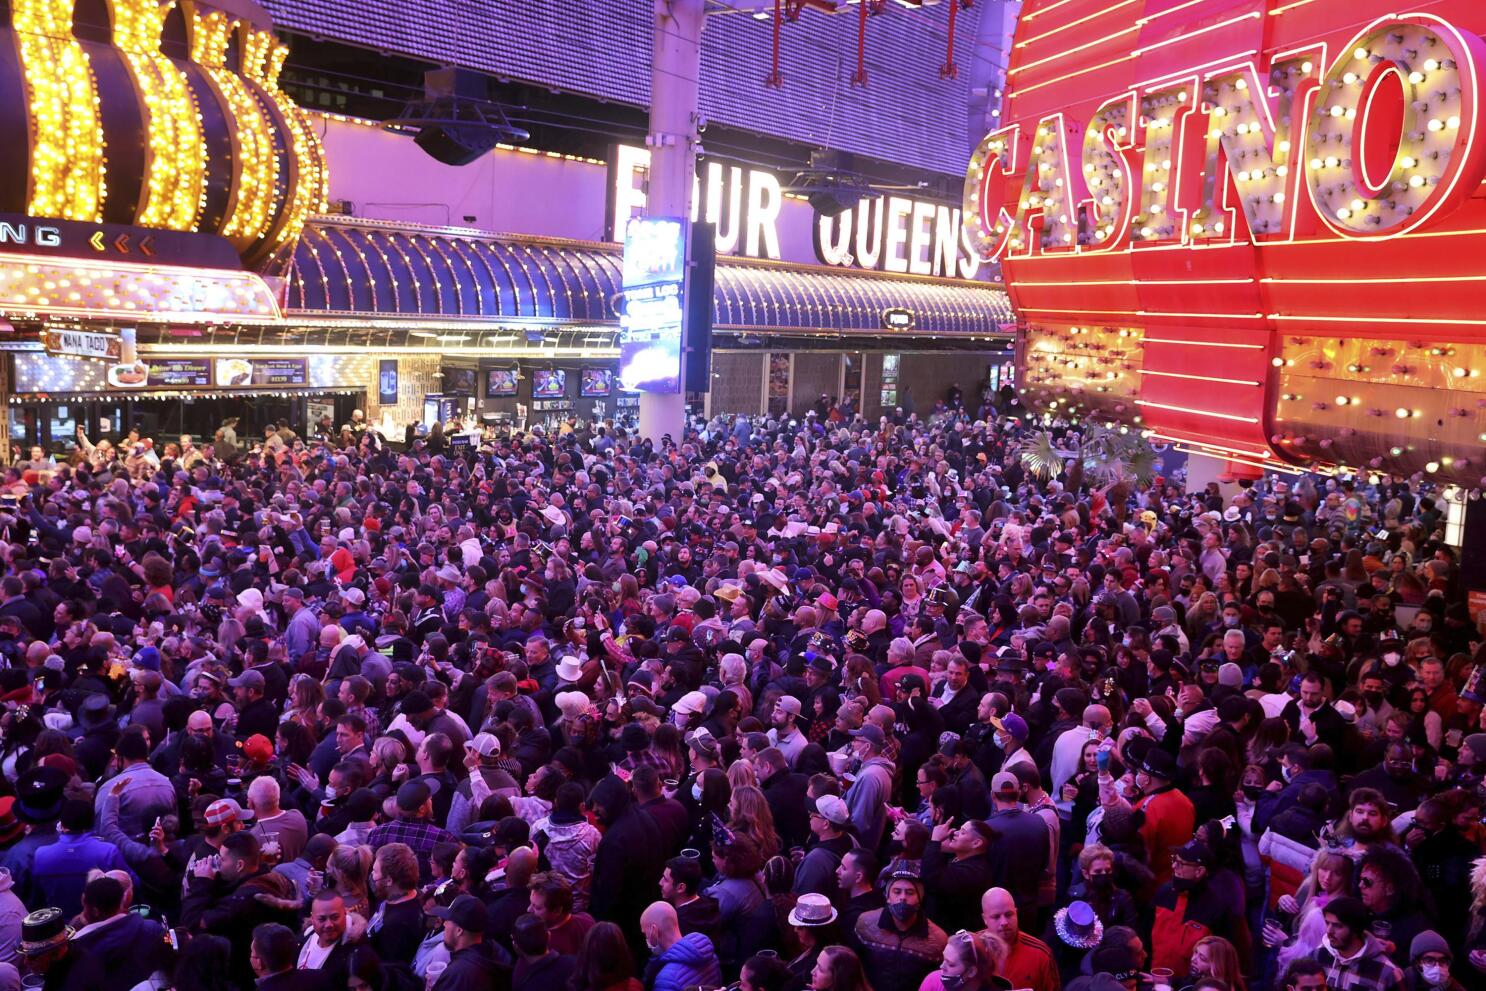 New Year's Eve at Fremont Street Experience in Downtown Las Vegas